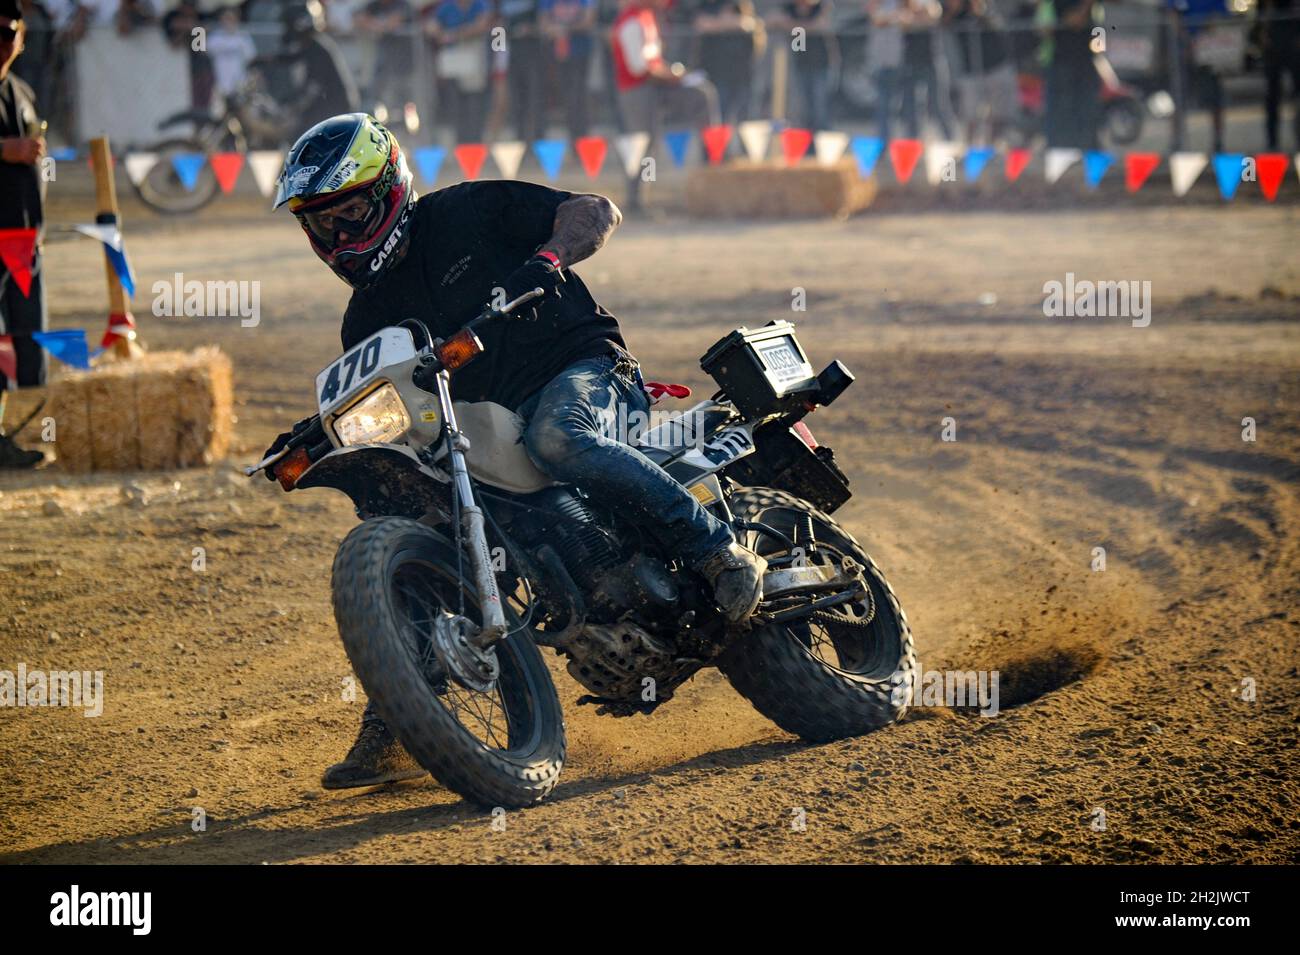 Motocross racer accelerates out of a turn at Glen Helen Raceway Stock Photo